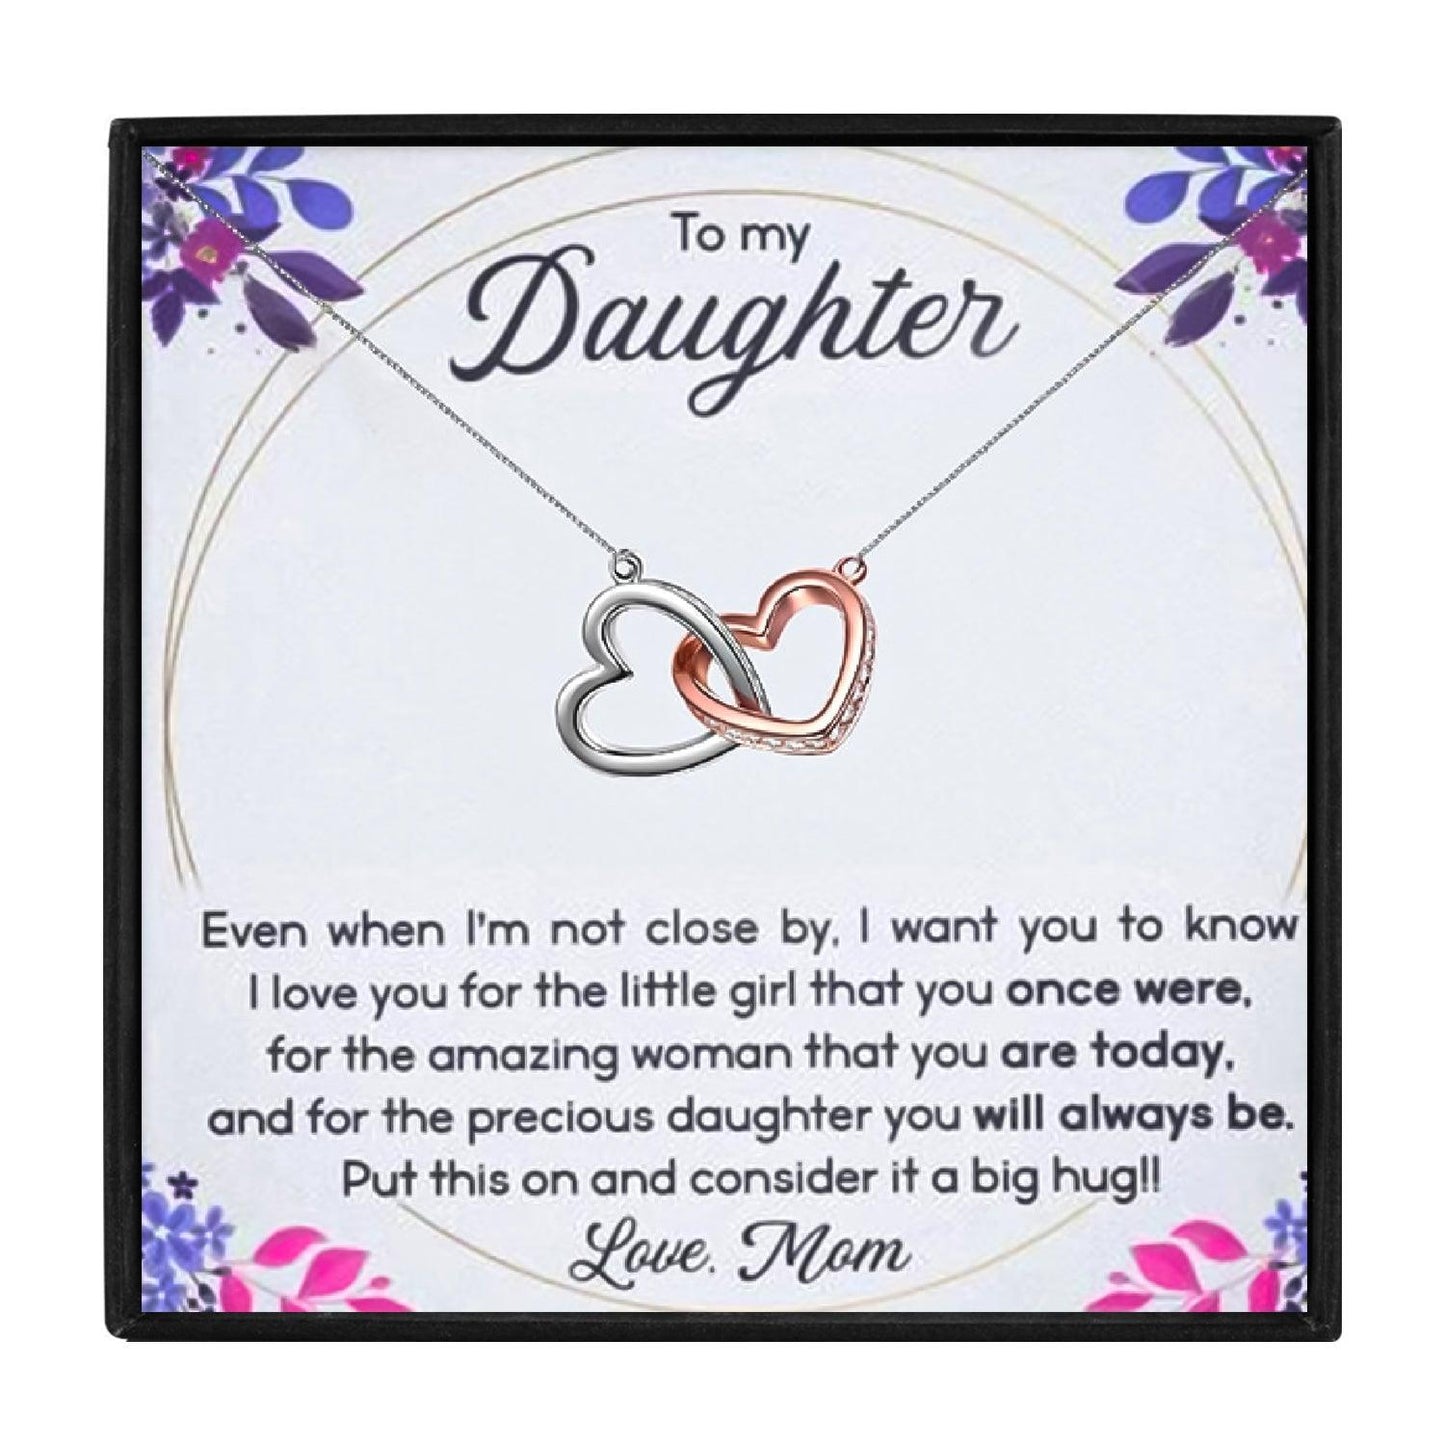 Special, Meaningful Daughter Necklaces From Mom for Christmas 2023 | Special, Meaningful Daughter Necklaces From Mom - undefined | Daughter necklace, To My Daughter, To my daughter necklace, To my daughter necklace from mom | From Hunny Life | hunnylife.com